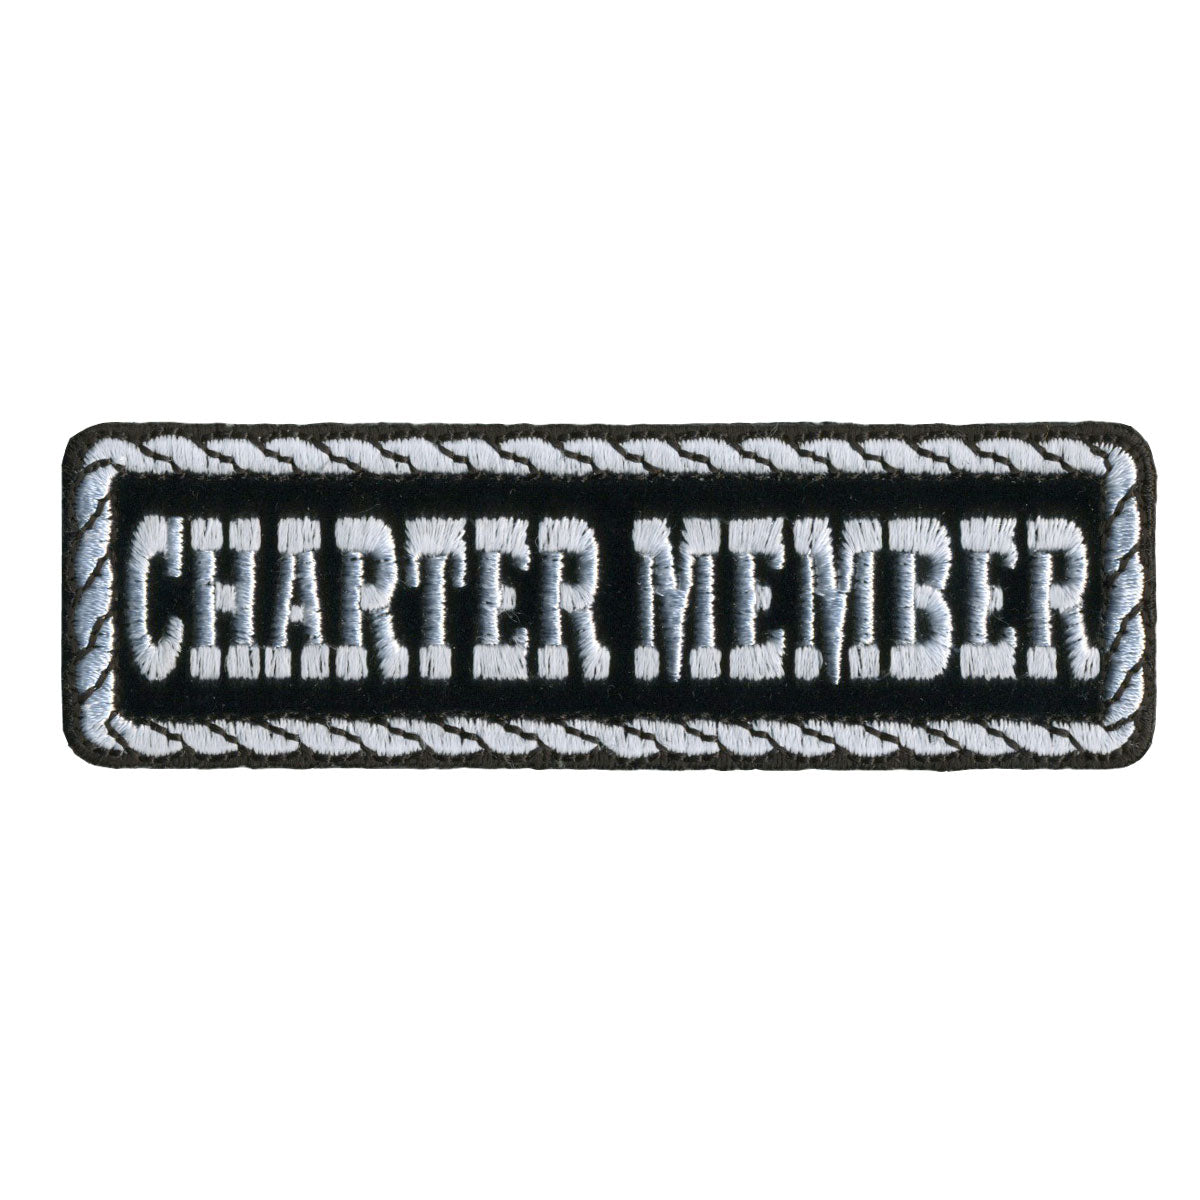 Hot Leathers PPD1016 Charter Member 4" x 1" Patch